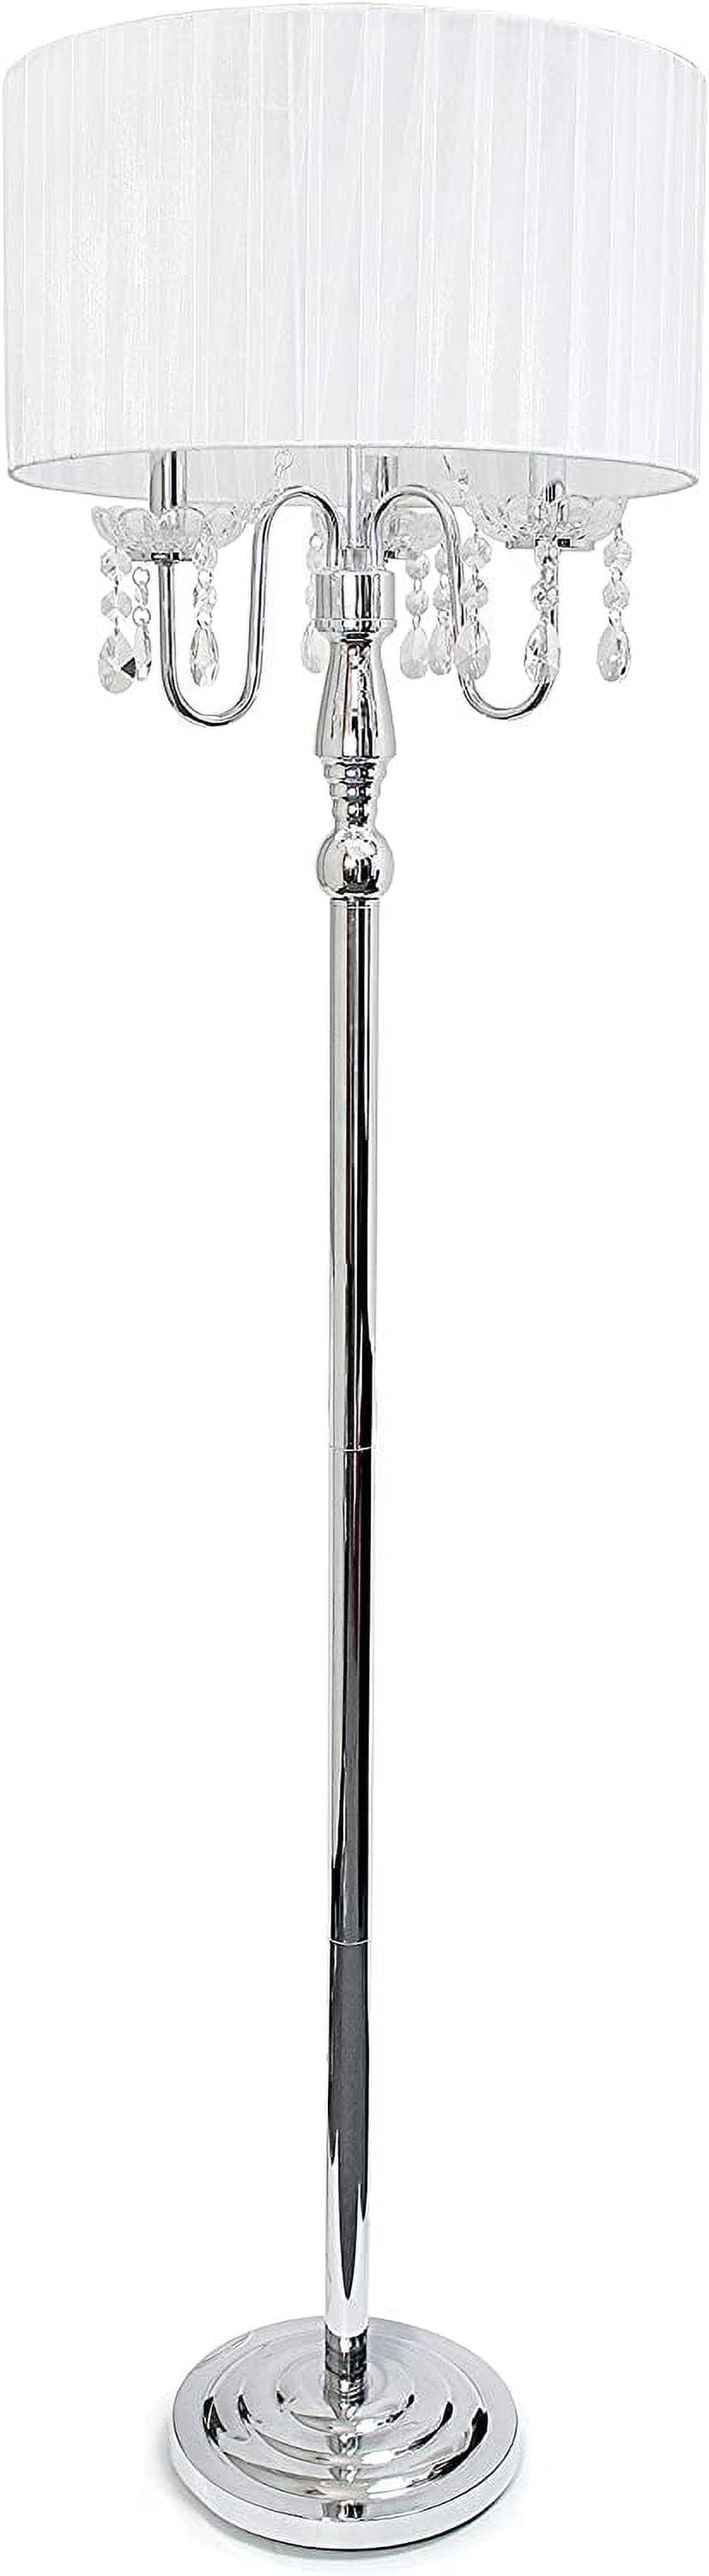 Elegant White Chrome Floor Lamp with Sheer Shade and Hanging Crystals